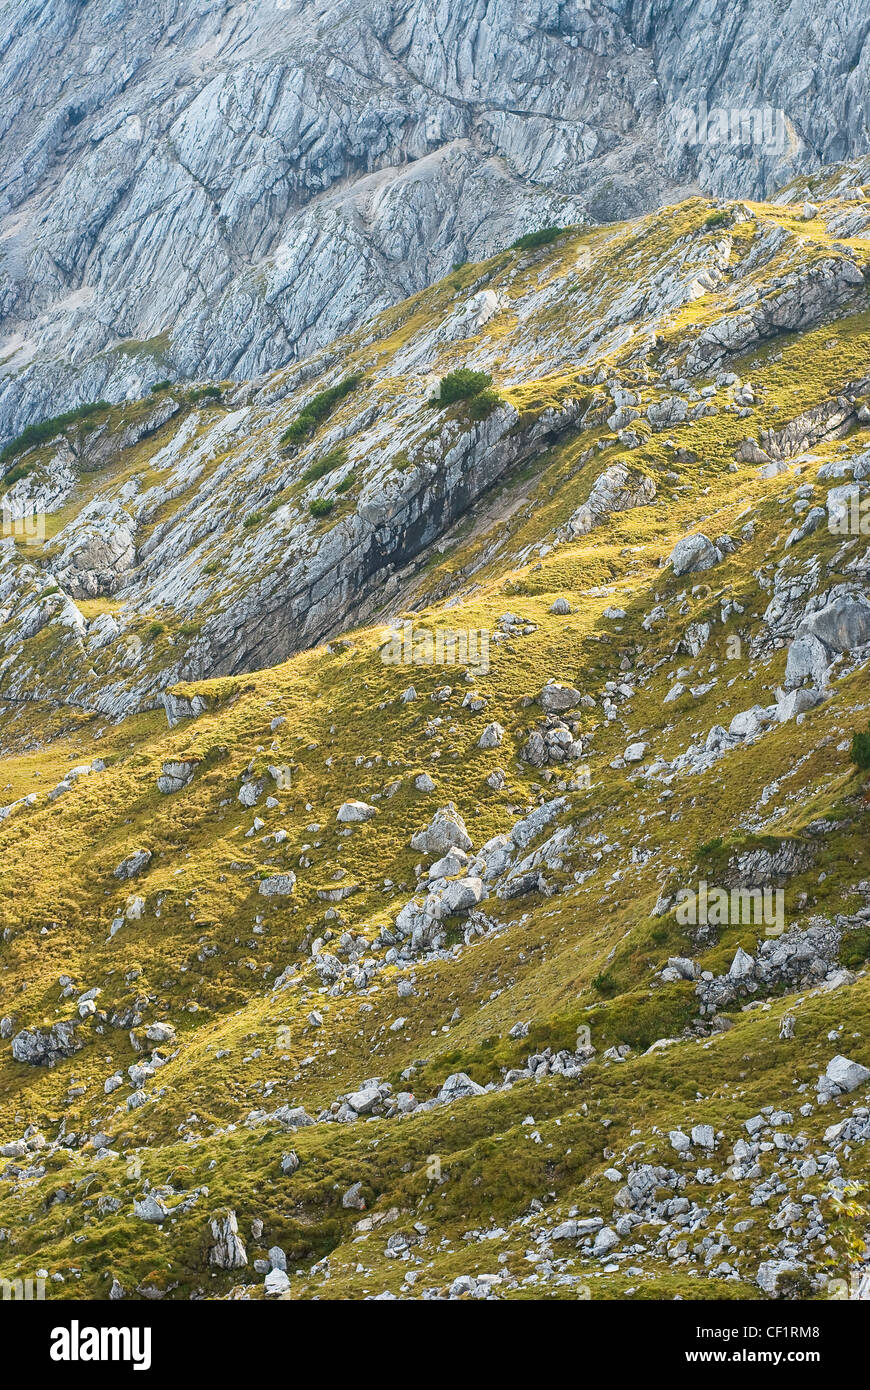 Alpine Mountain Landscape In Bavaria with Rocks and Grass Stock Photo